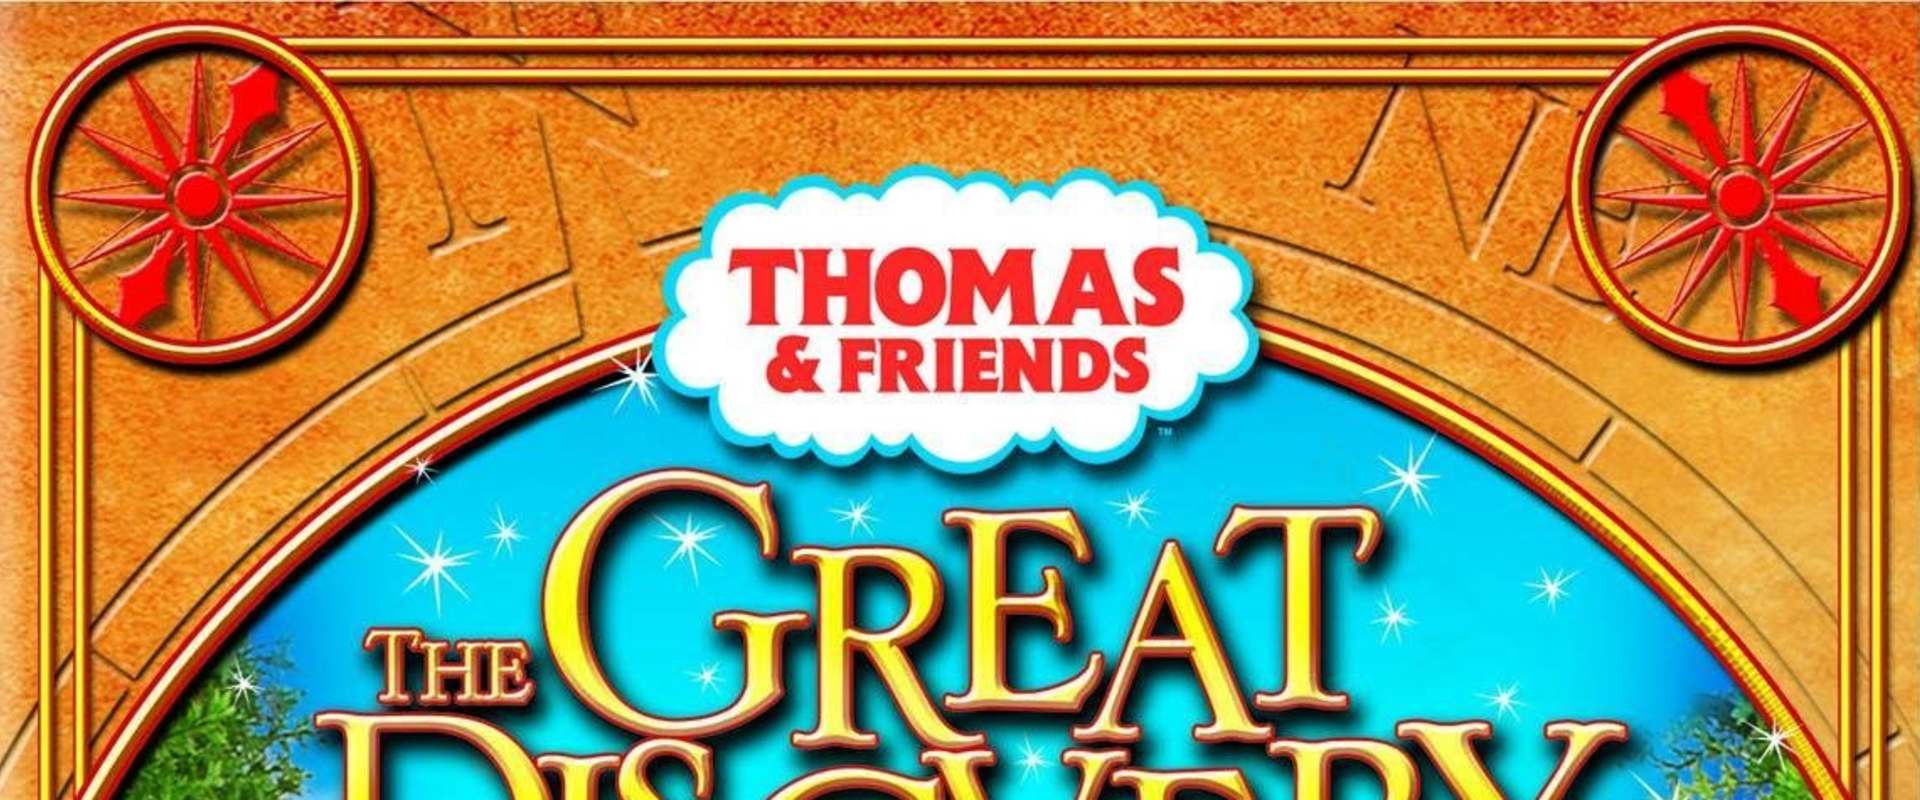 Thomas & Friends: The Great Discovery - The Movie background 2